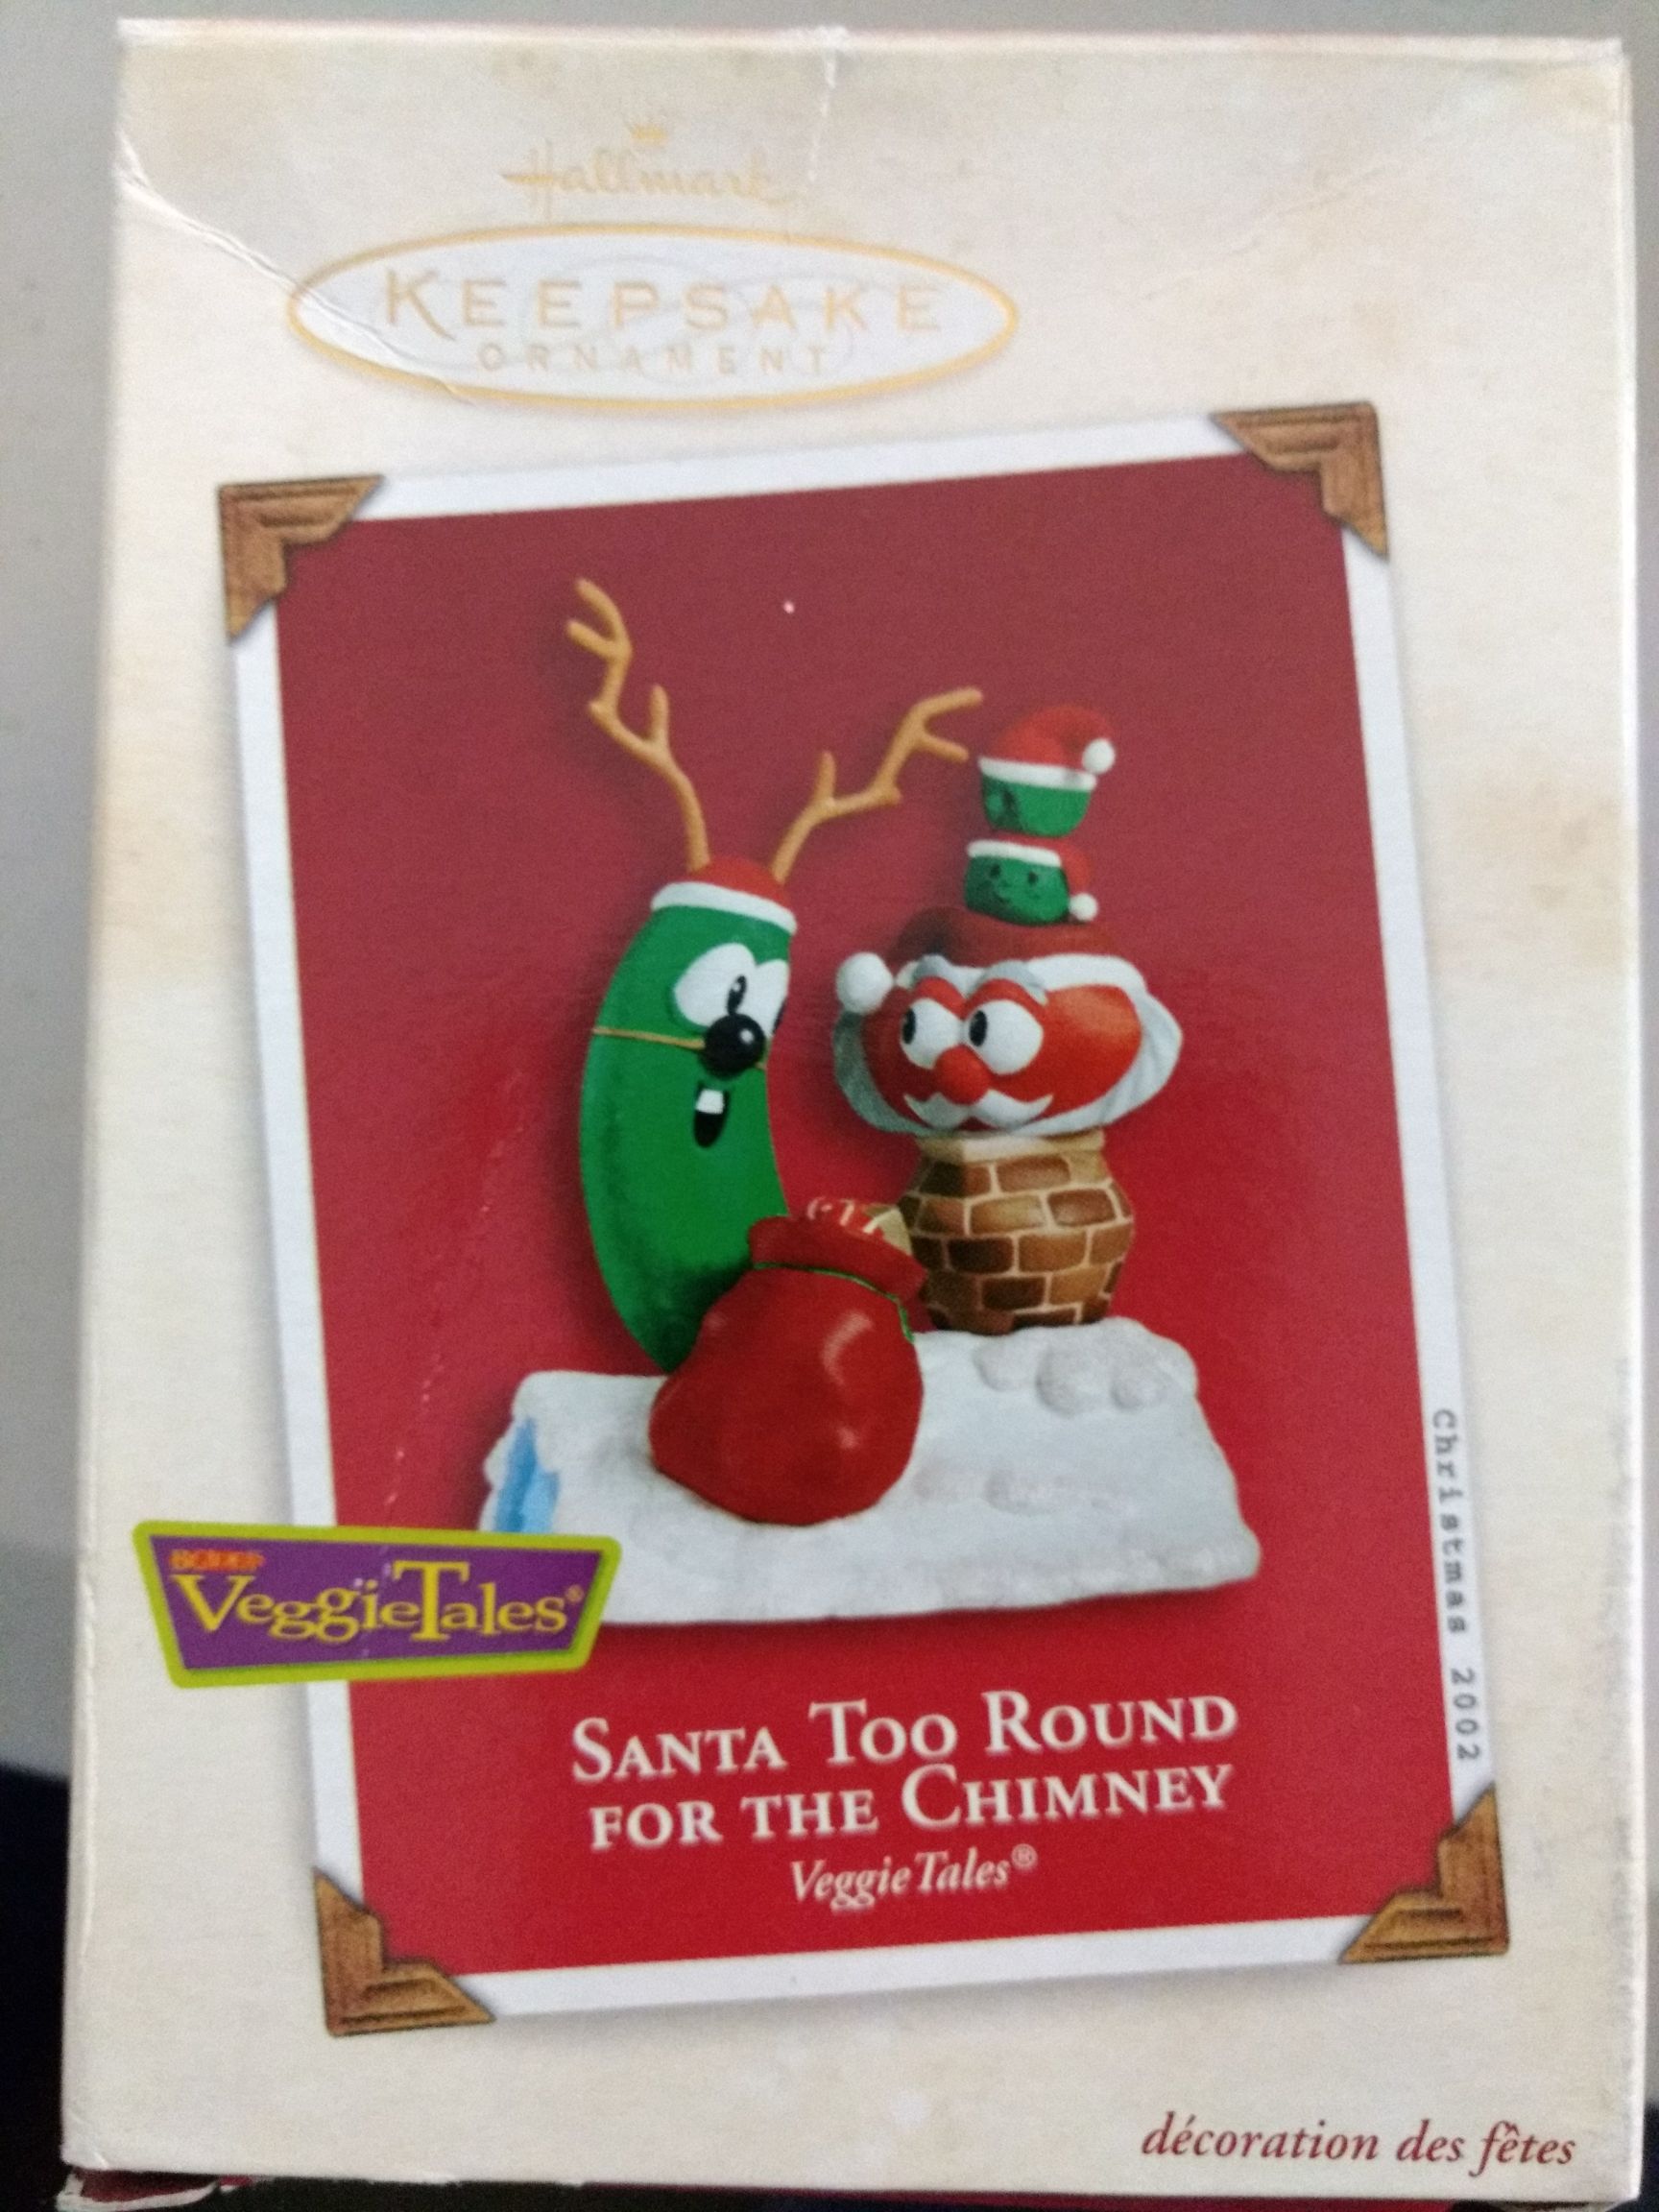 Santa Too Round for the Chimney  (Veggie Tales) ornament collectible [Barcode 015012700060] - Main Image 1